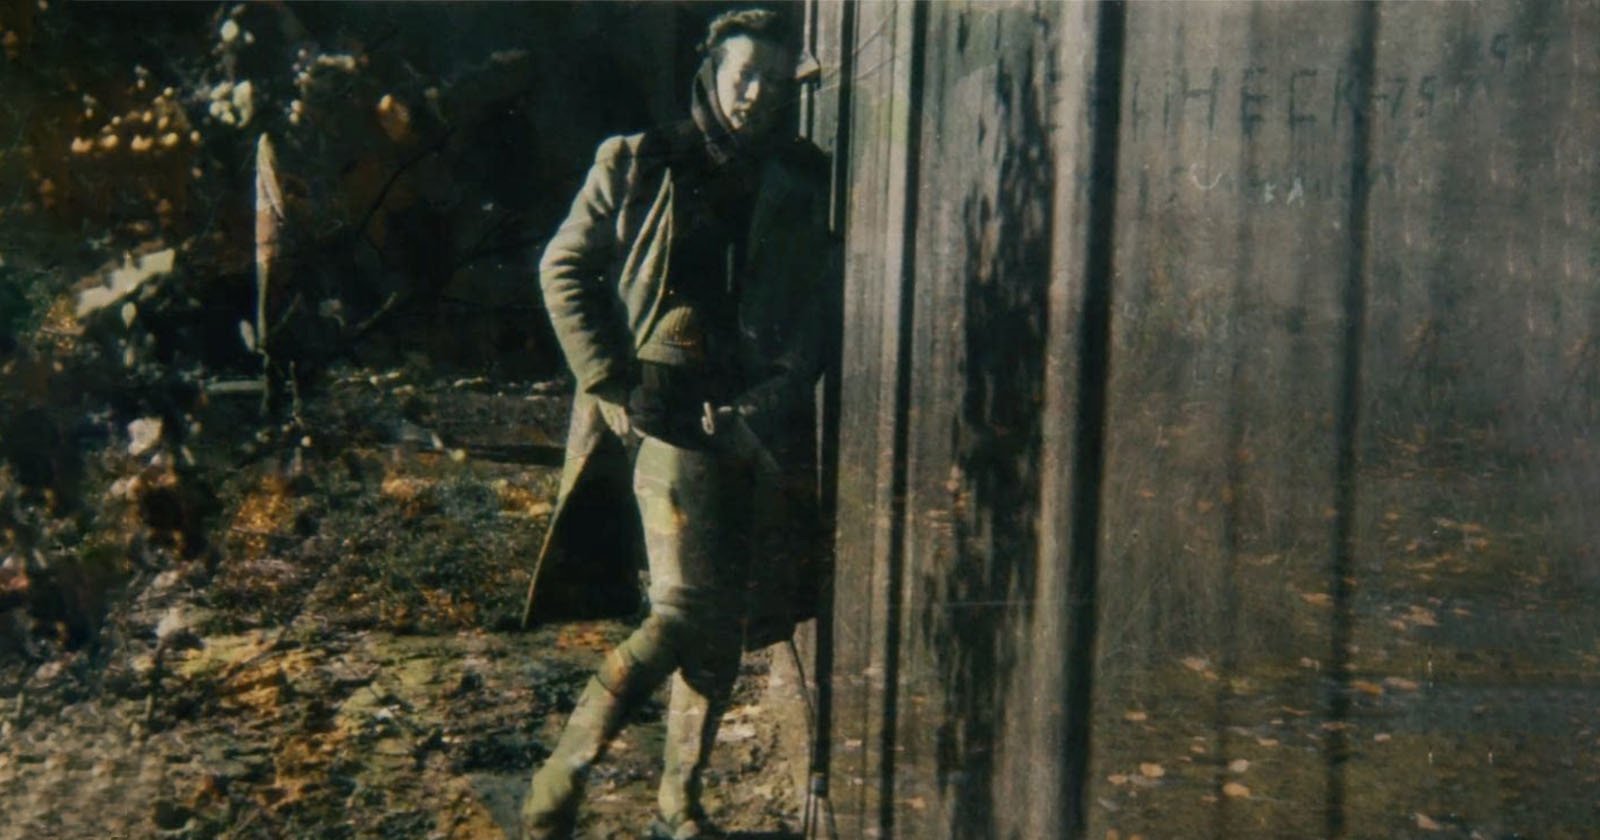 The Story Behind the Secret Photographers of the Holocaust